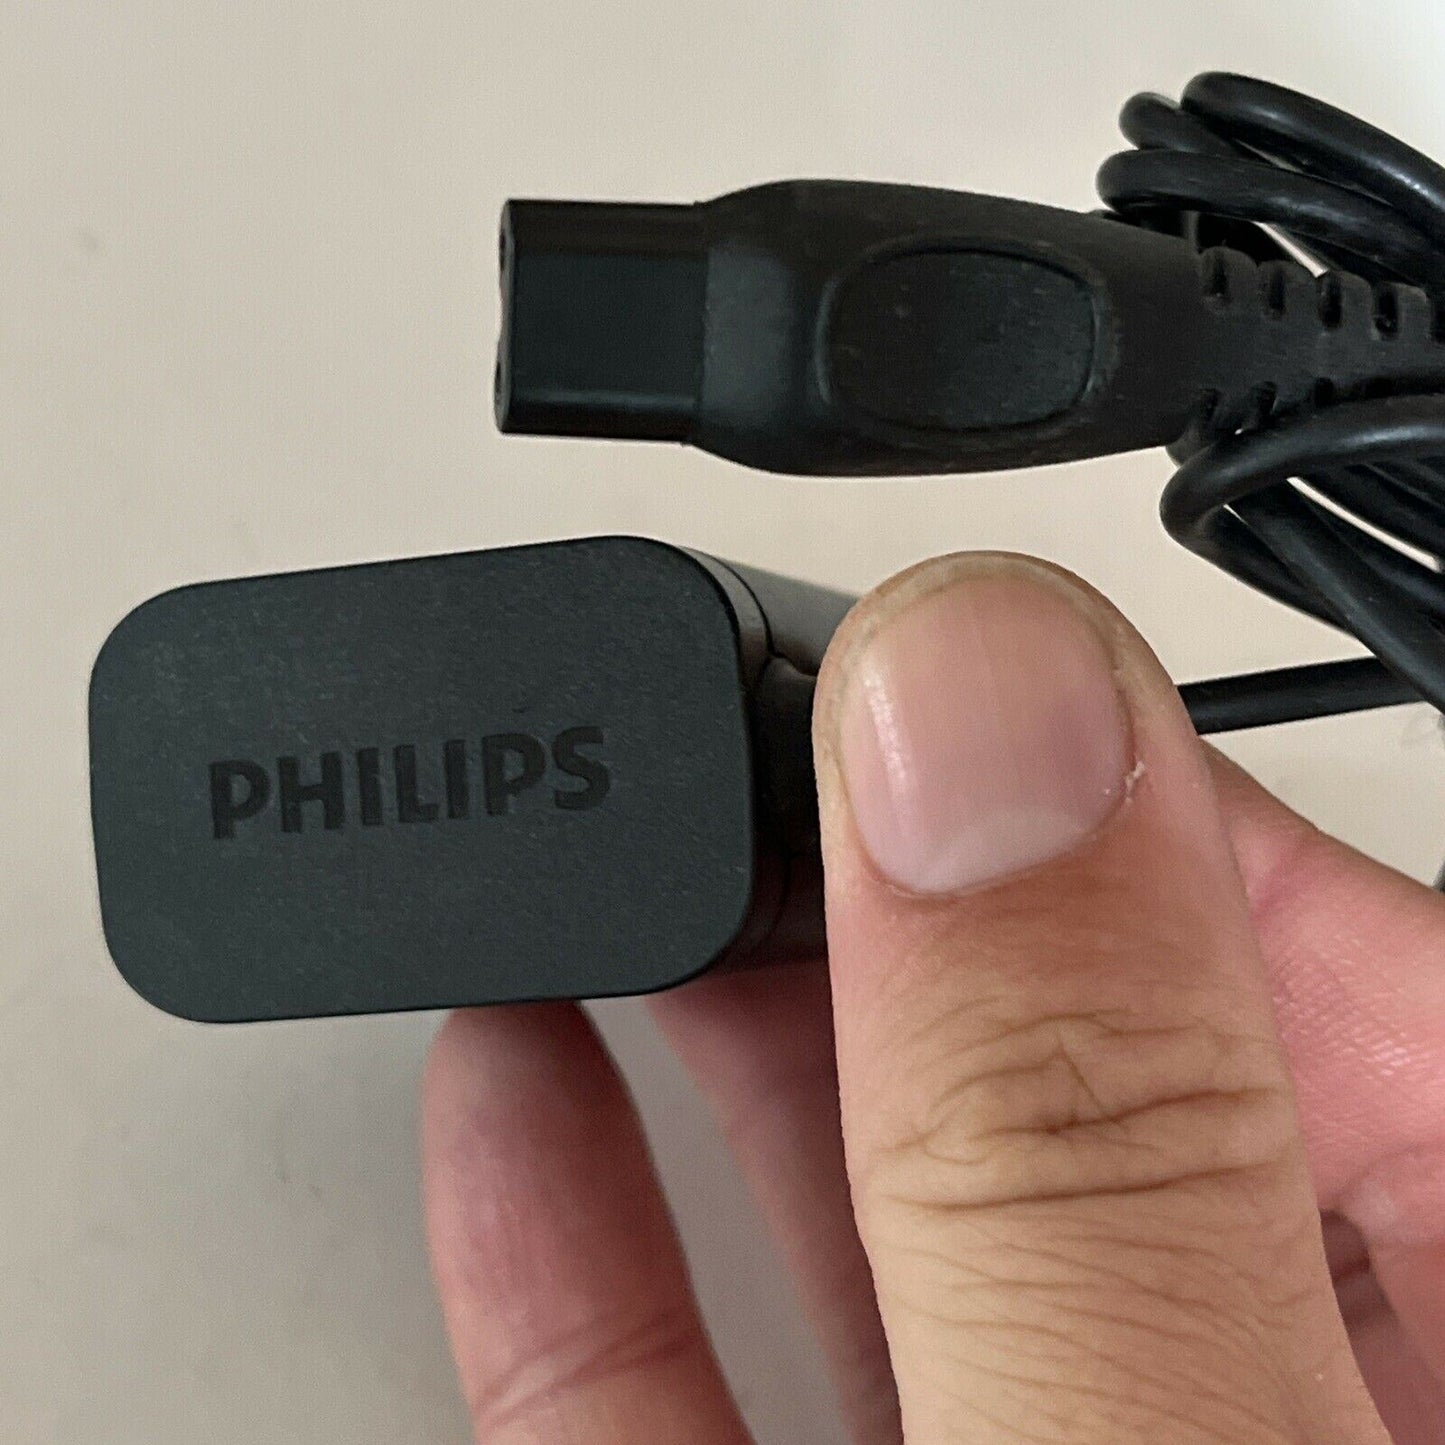 Genuine Philips HQ8505 Shaver Charger Adapter